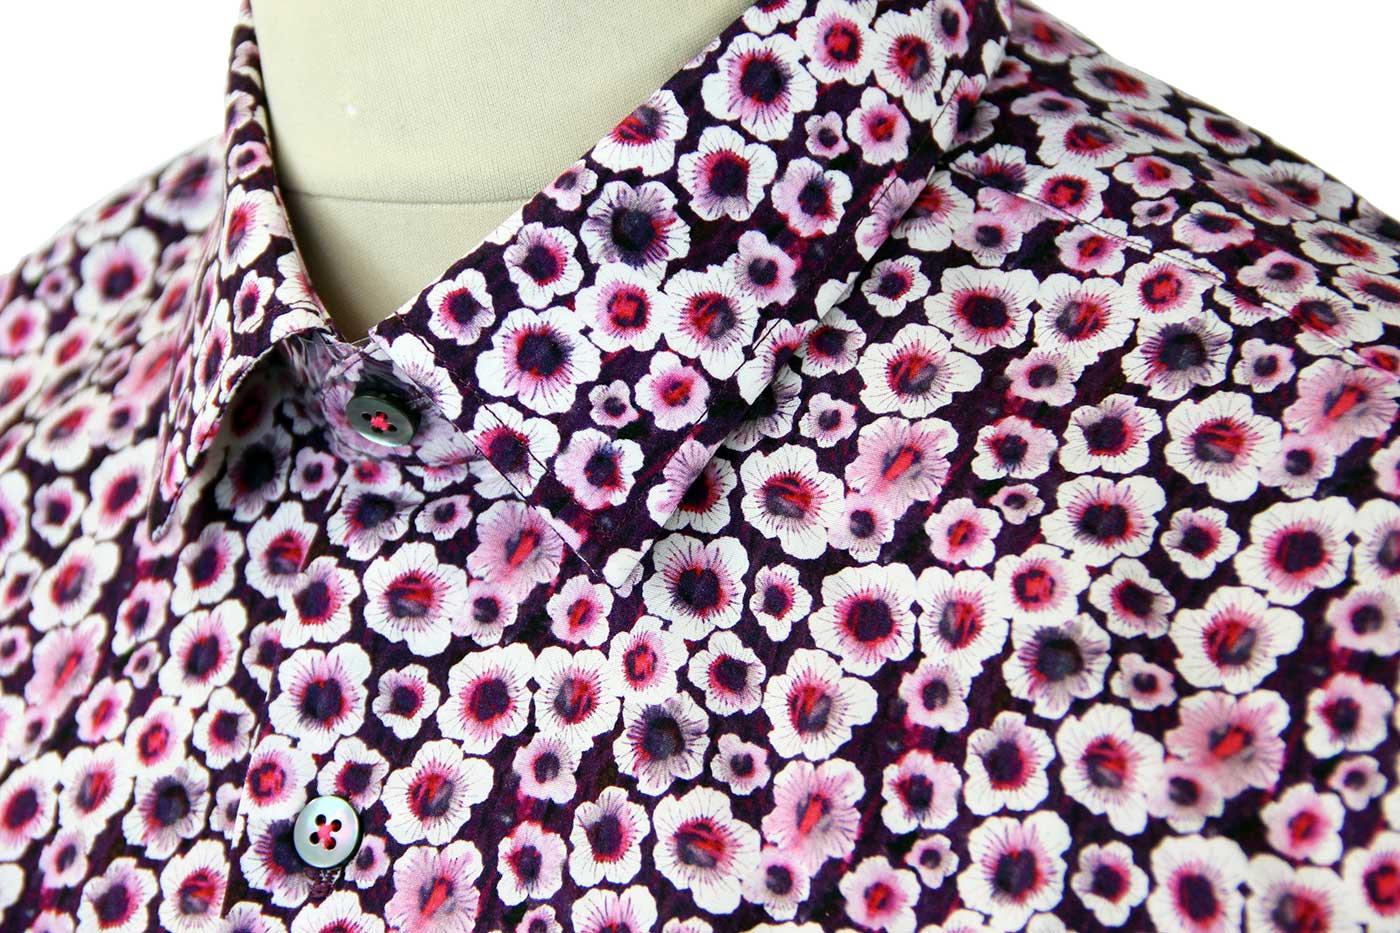 1 LIKE NO OTHER Corms Retro 60s Mod Hand Drawn Floral Shirt